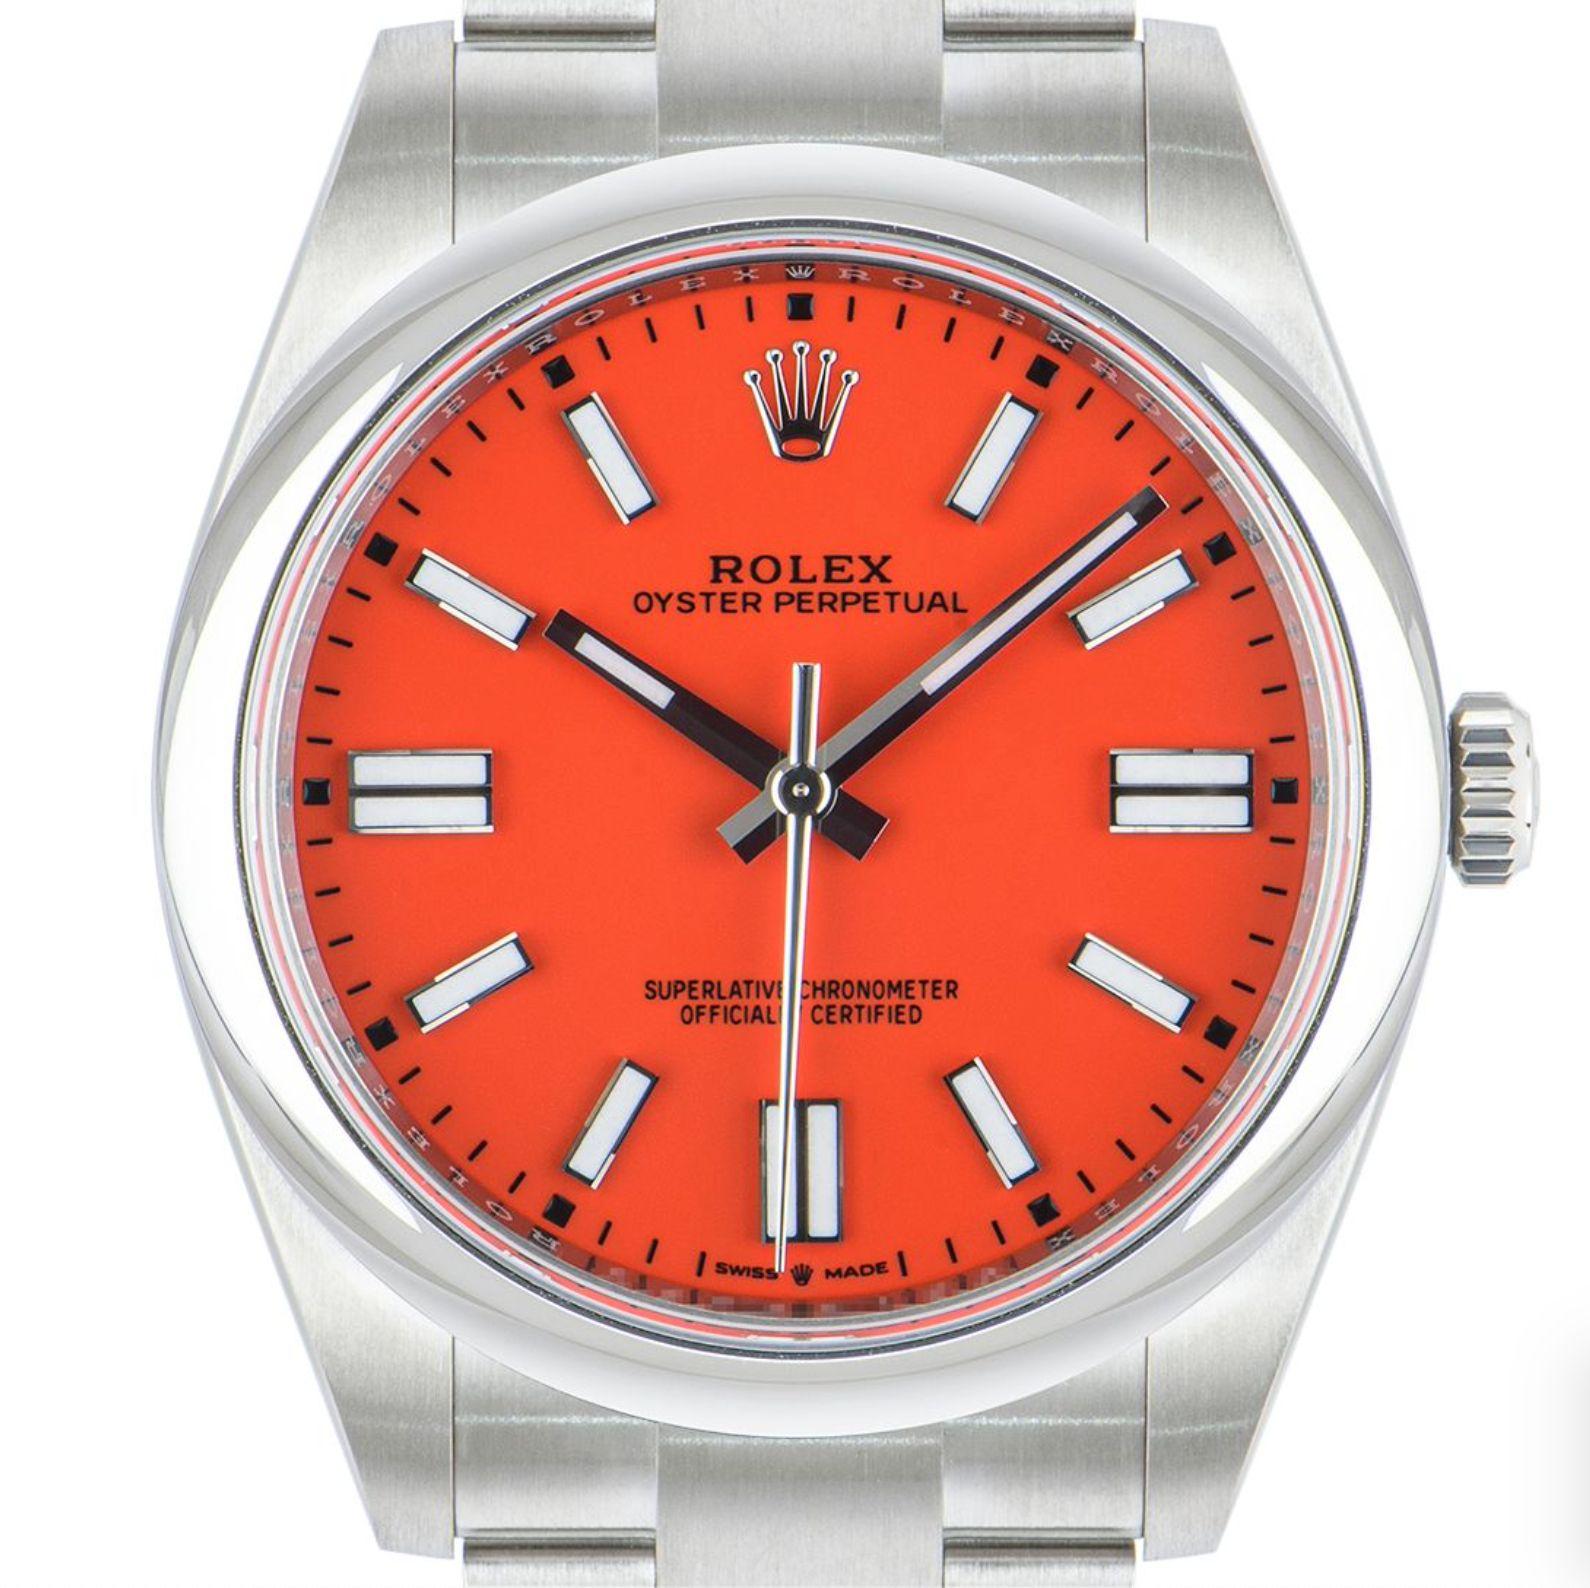 An unworn 41mm Oyster Perpetual from Rolex in Oystersteel. Features a coral red dial and a smooth domed bezel. The Oyster bracelet comes with a folding Oysterclasp which is equipped with the Easylink 5mm comfort extension link. Fitted with a